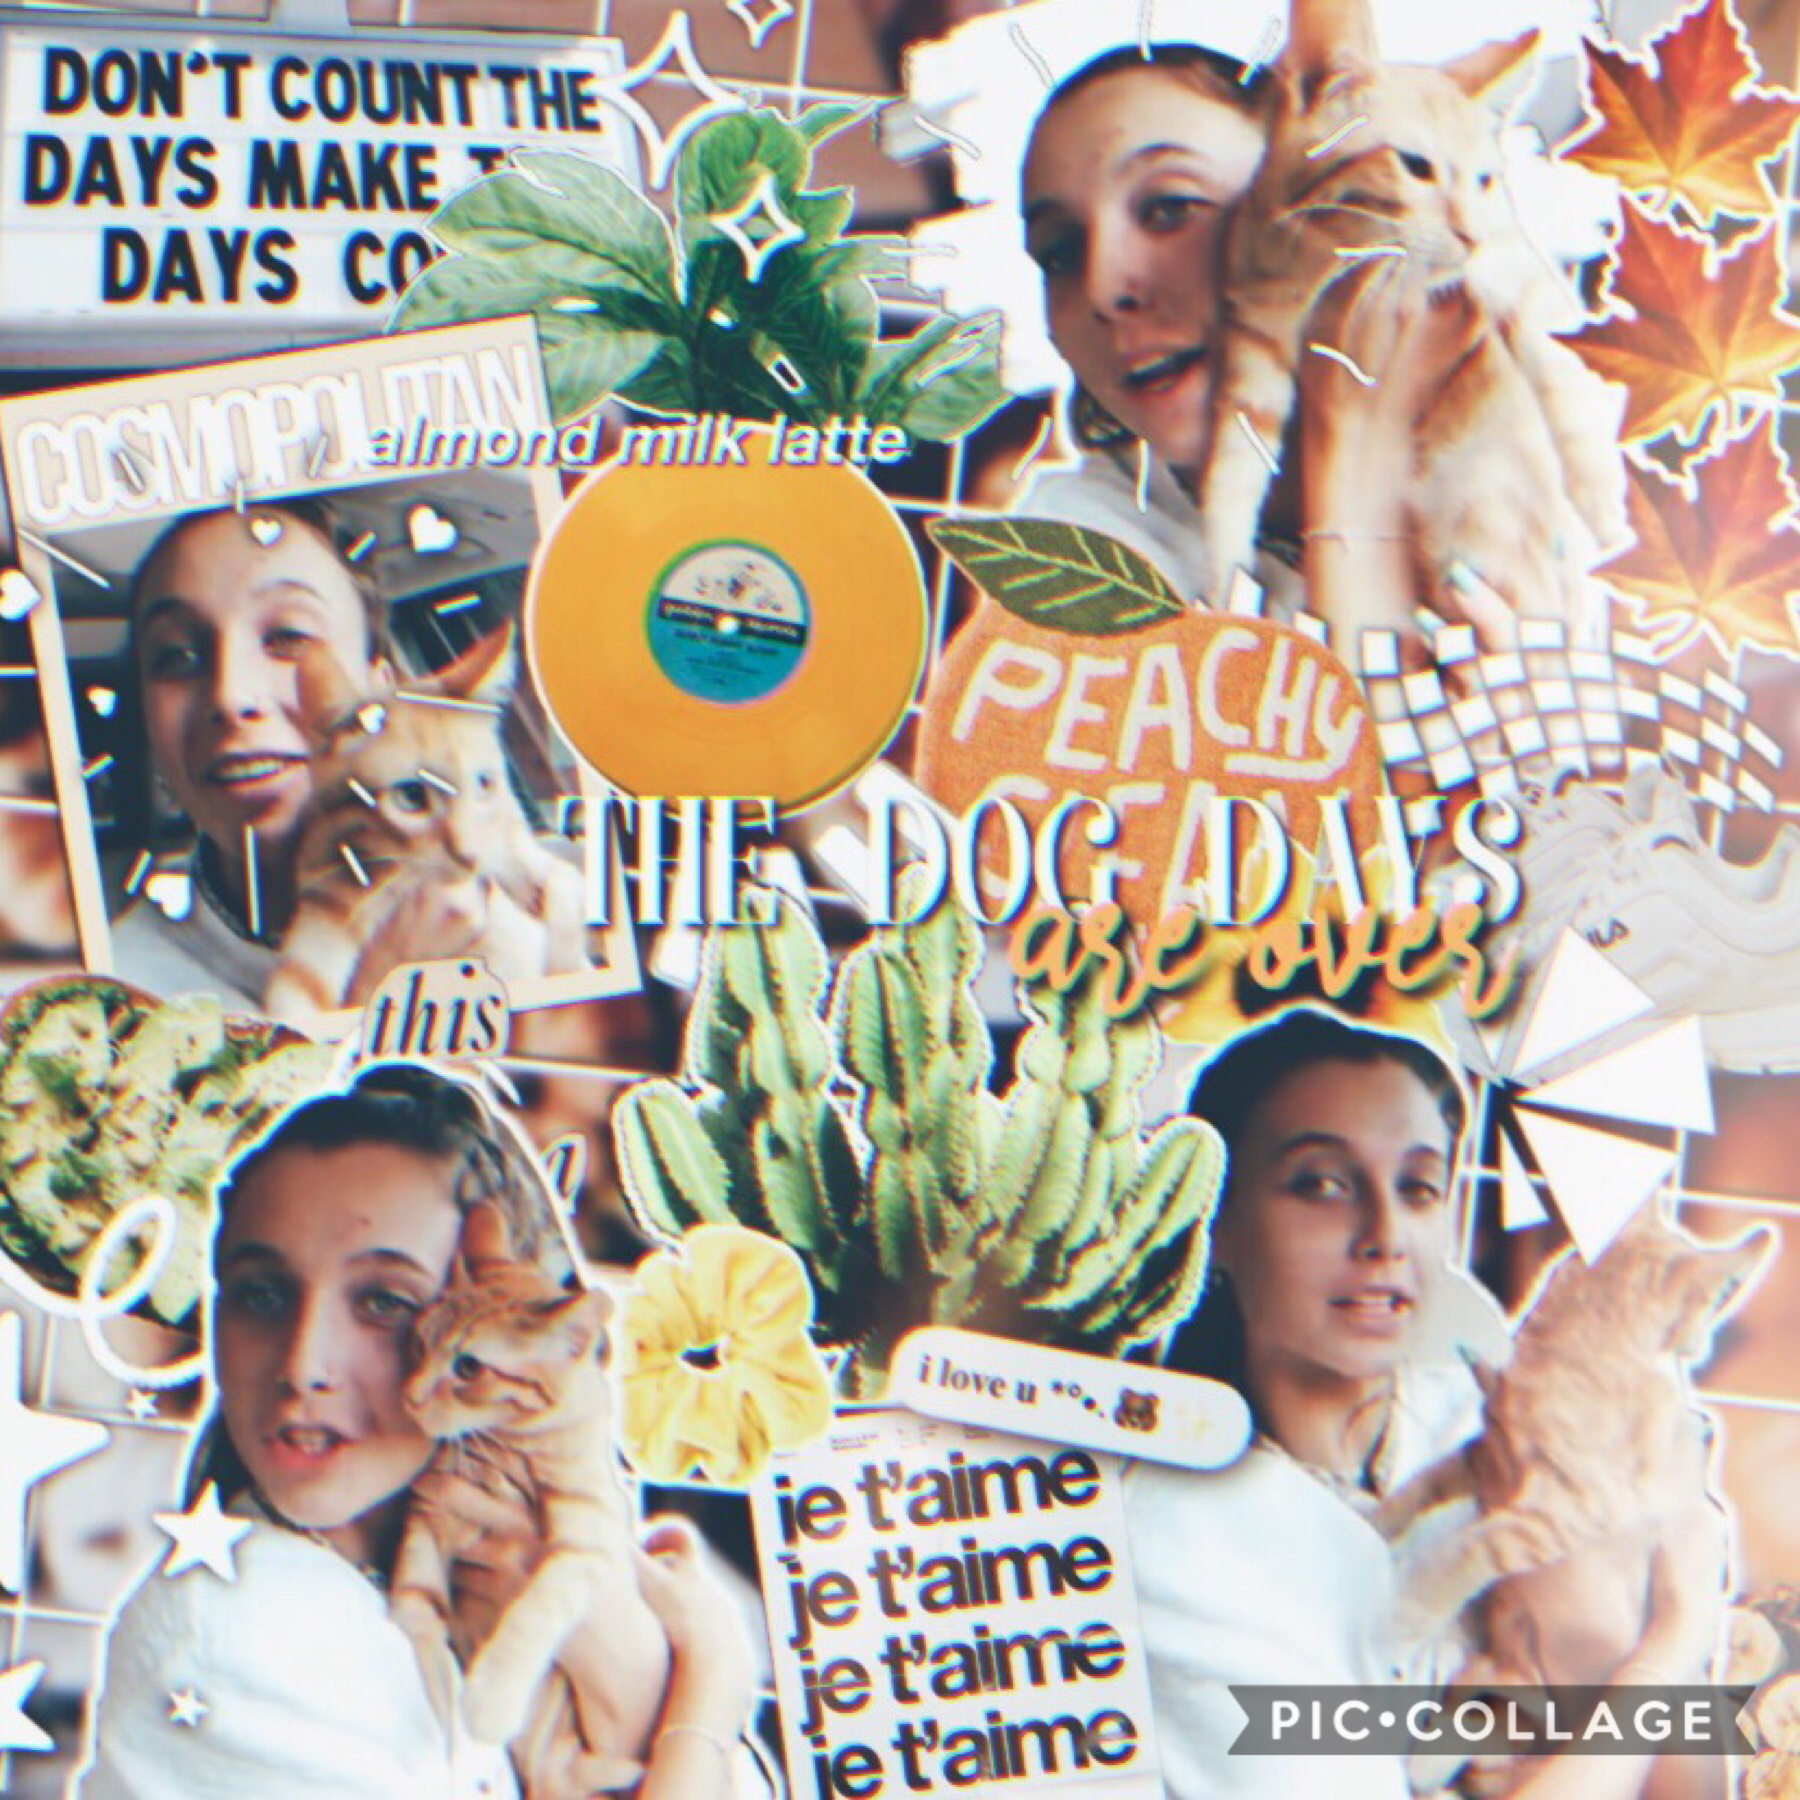 fall is here 🧸🍂 (click)

hey!! my name’s ella! i’m a fairly new editor on here from insta! loveeeee emma chamberlain 🧡 comment below to be friends!